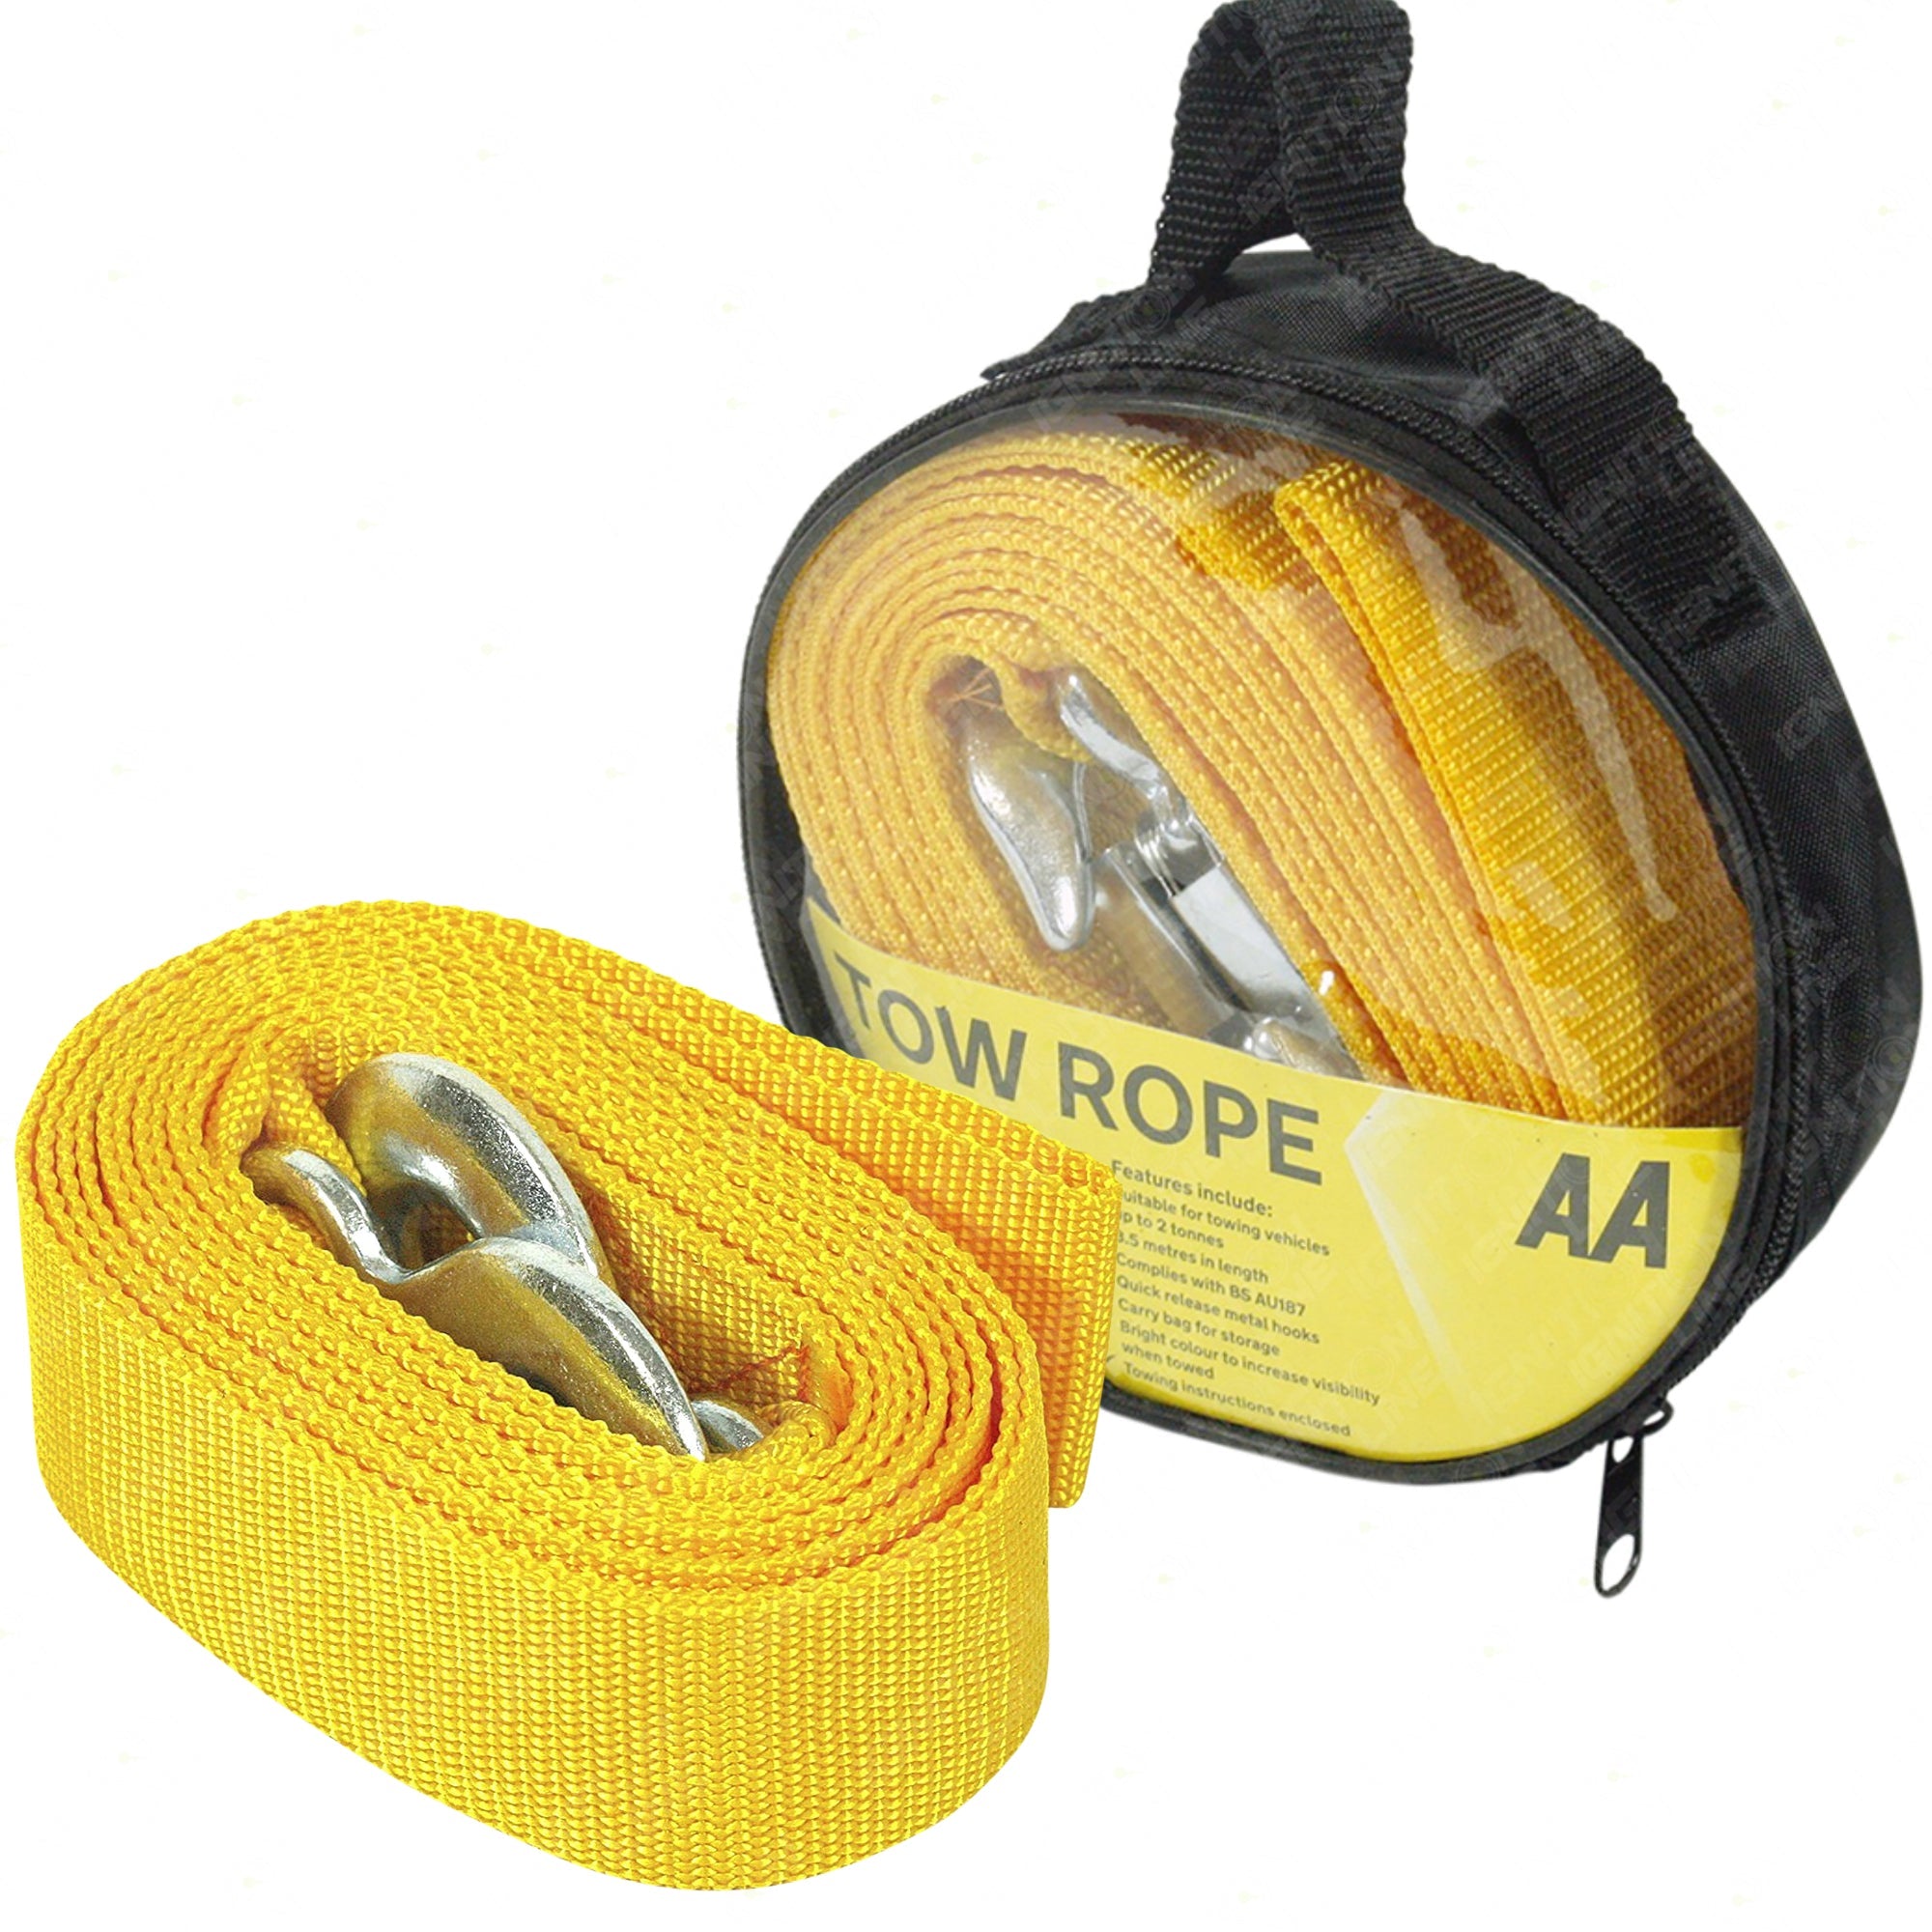 Tow Rope 3.5M 2 Tonne